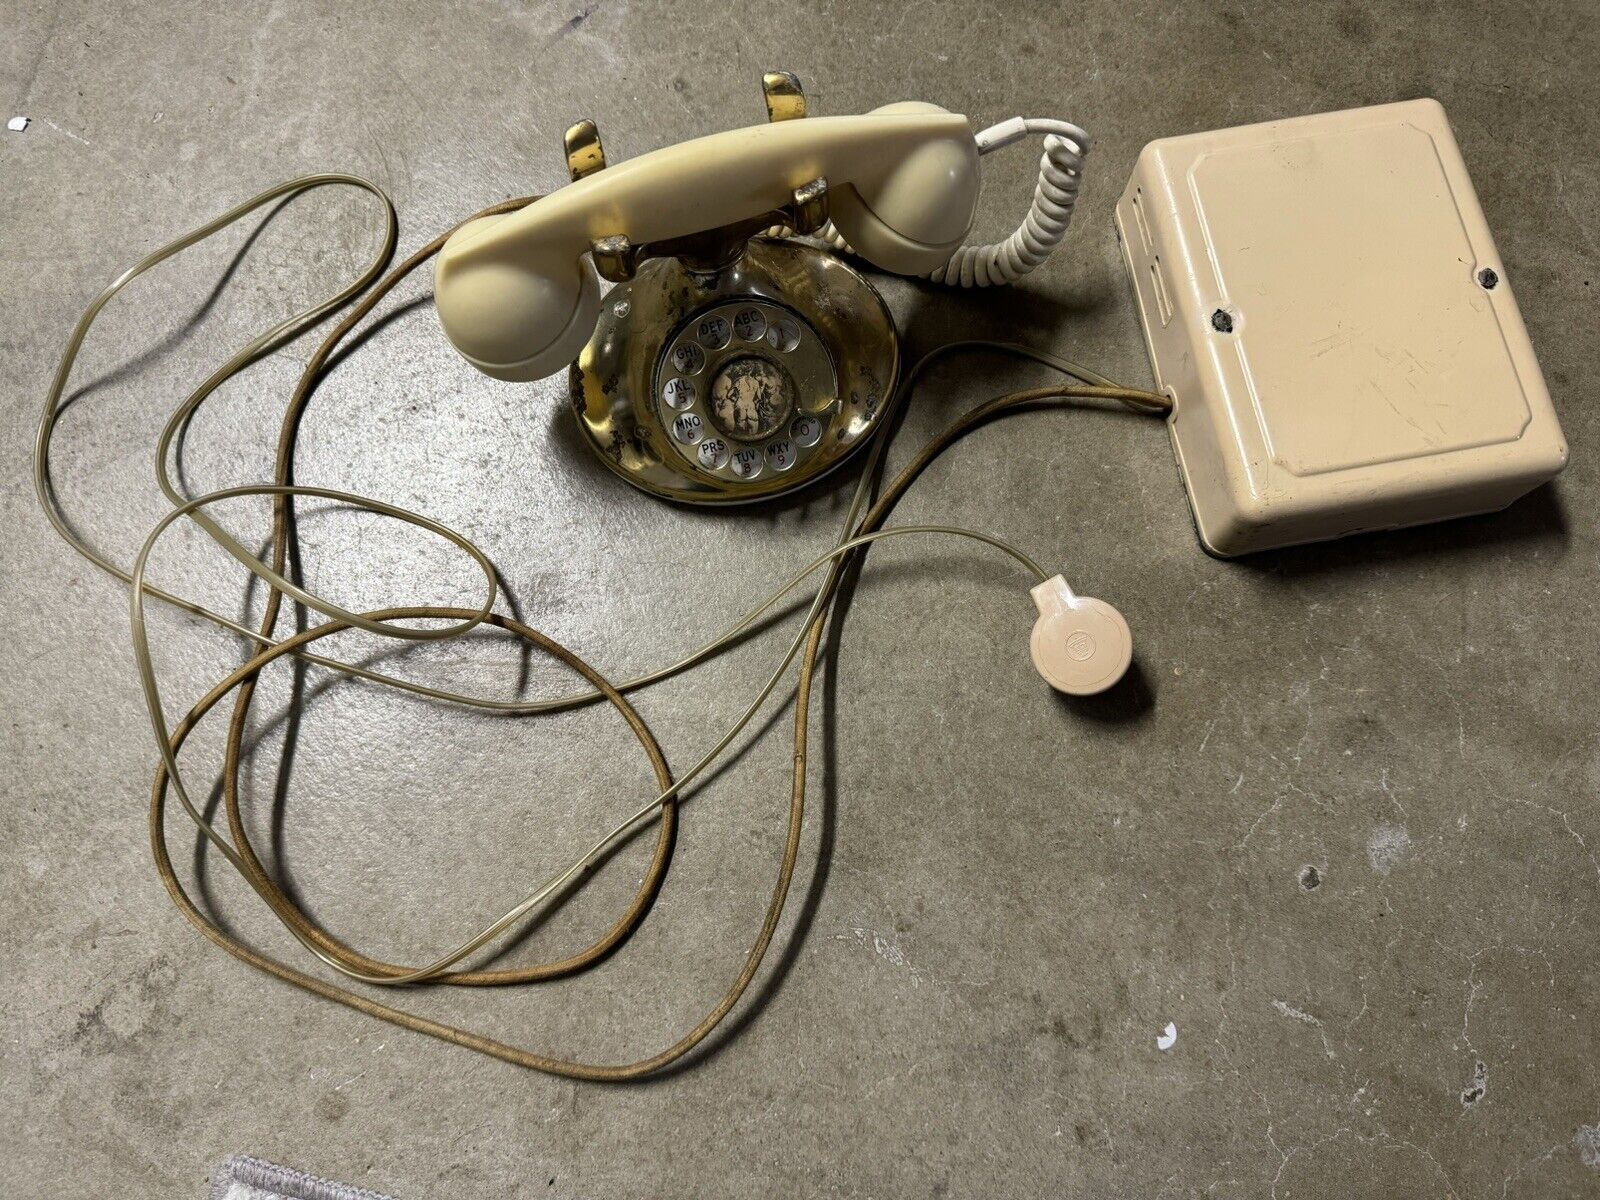 Western Electric 202 - Imperial - Gold Plated F1 Handset